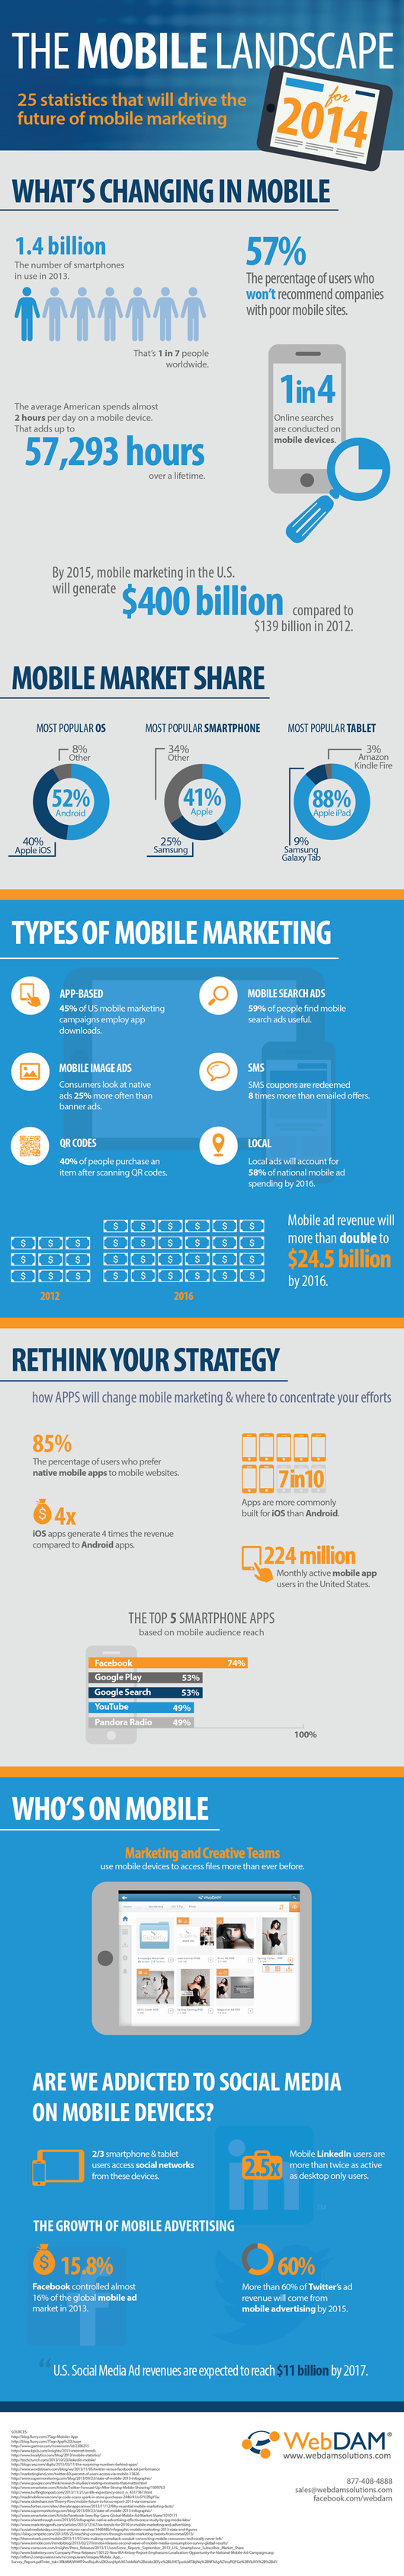 Mobile-Marketing-Infographic-2014.png